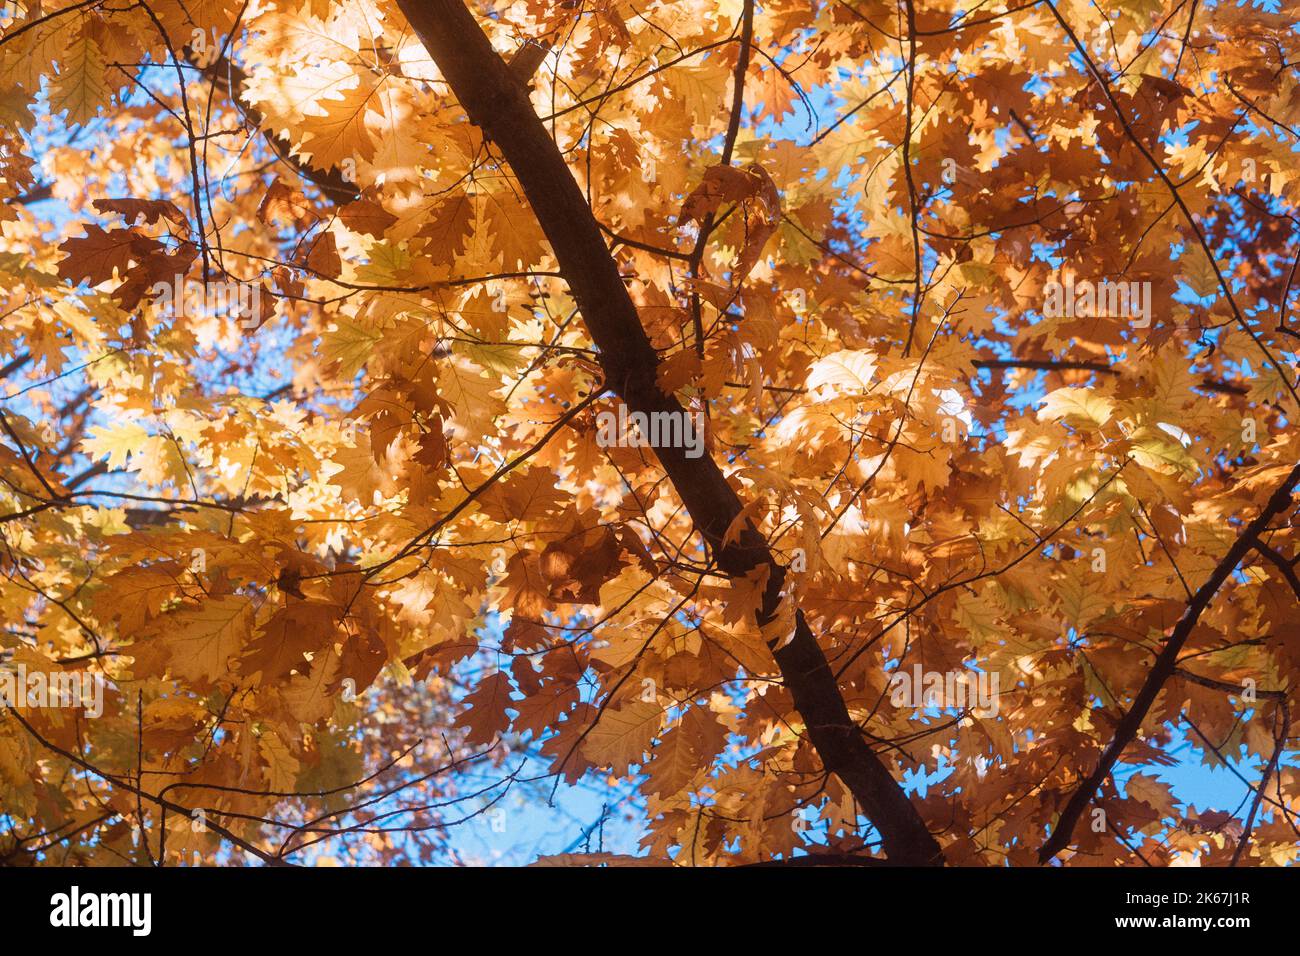 yellow and orange autumn leaves on a tree branch Stock Photo